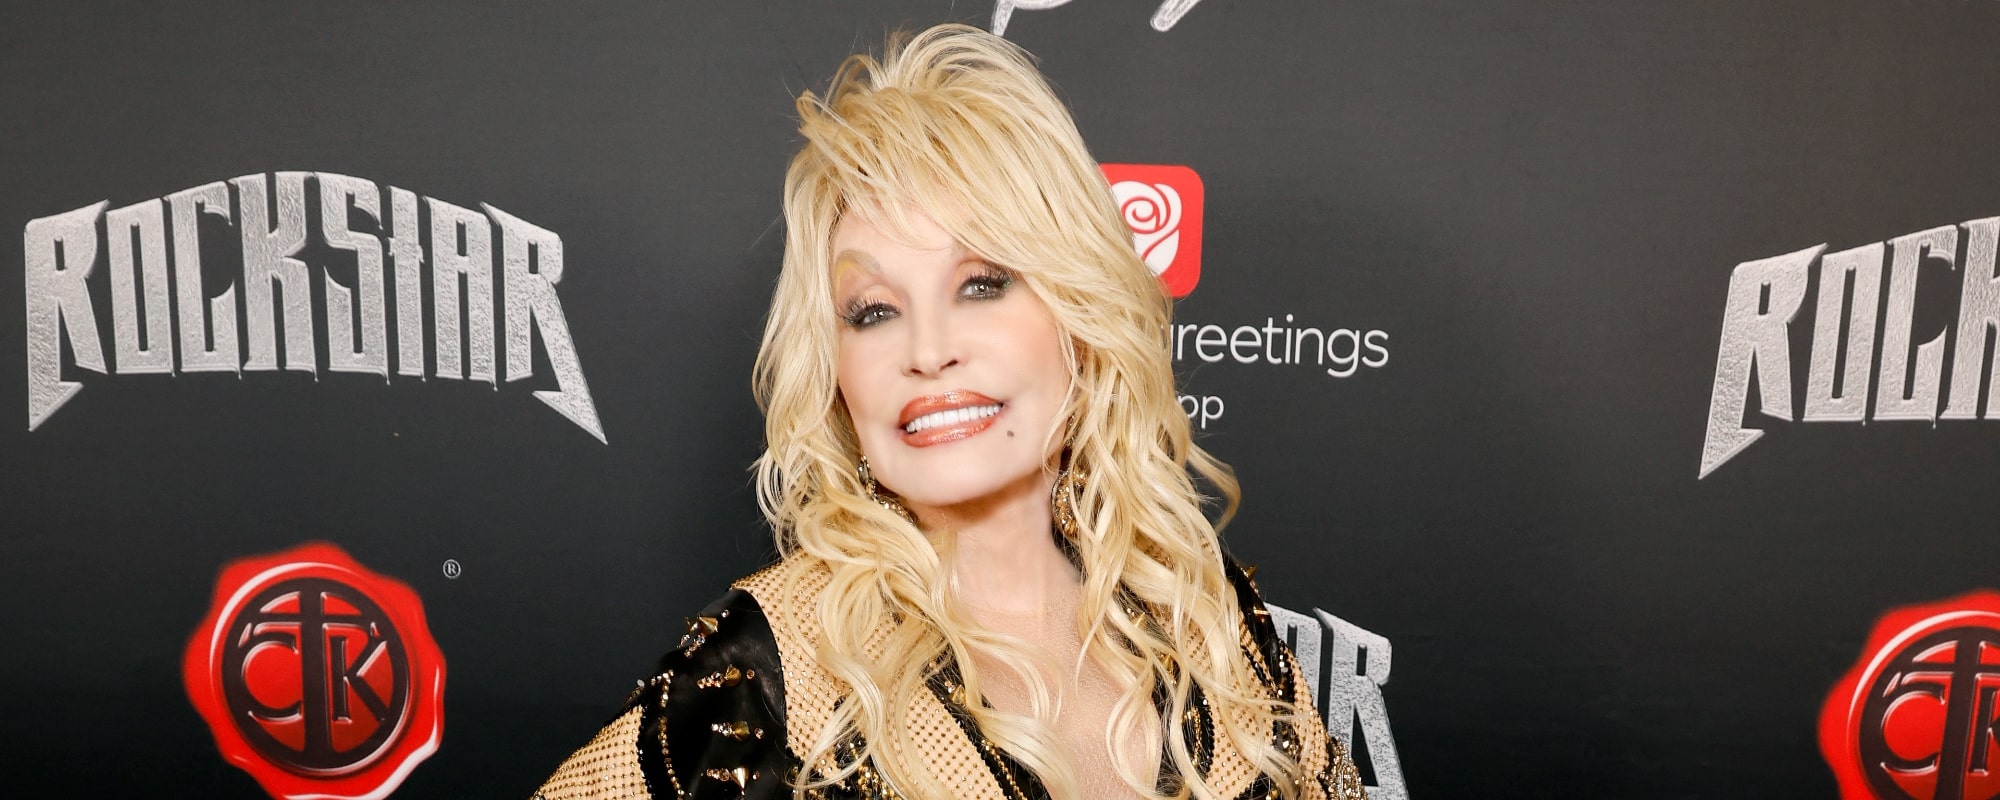 Dolly Parton’s Manager Reveals She Kept Her Halftime Show Outfit a Secret Until the Last Minute